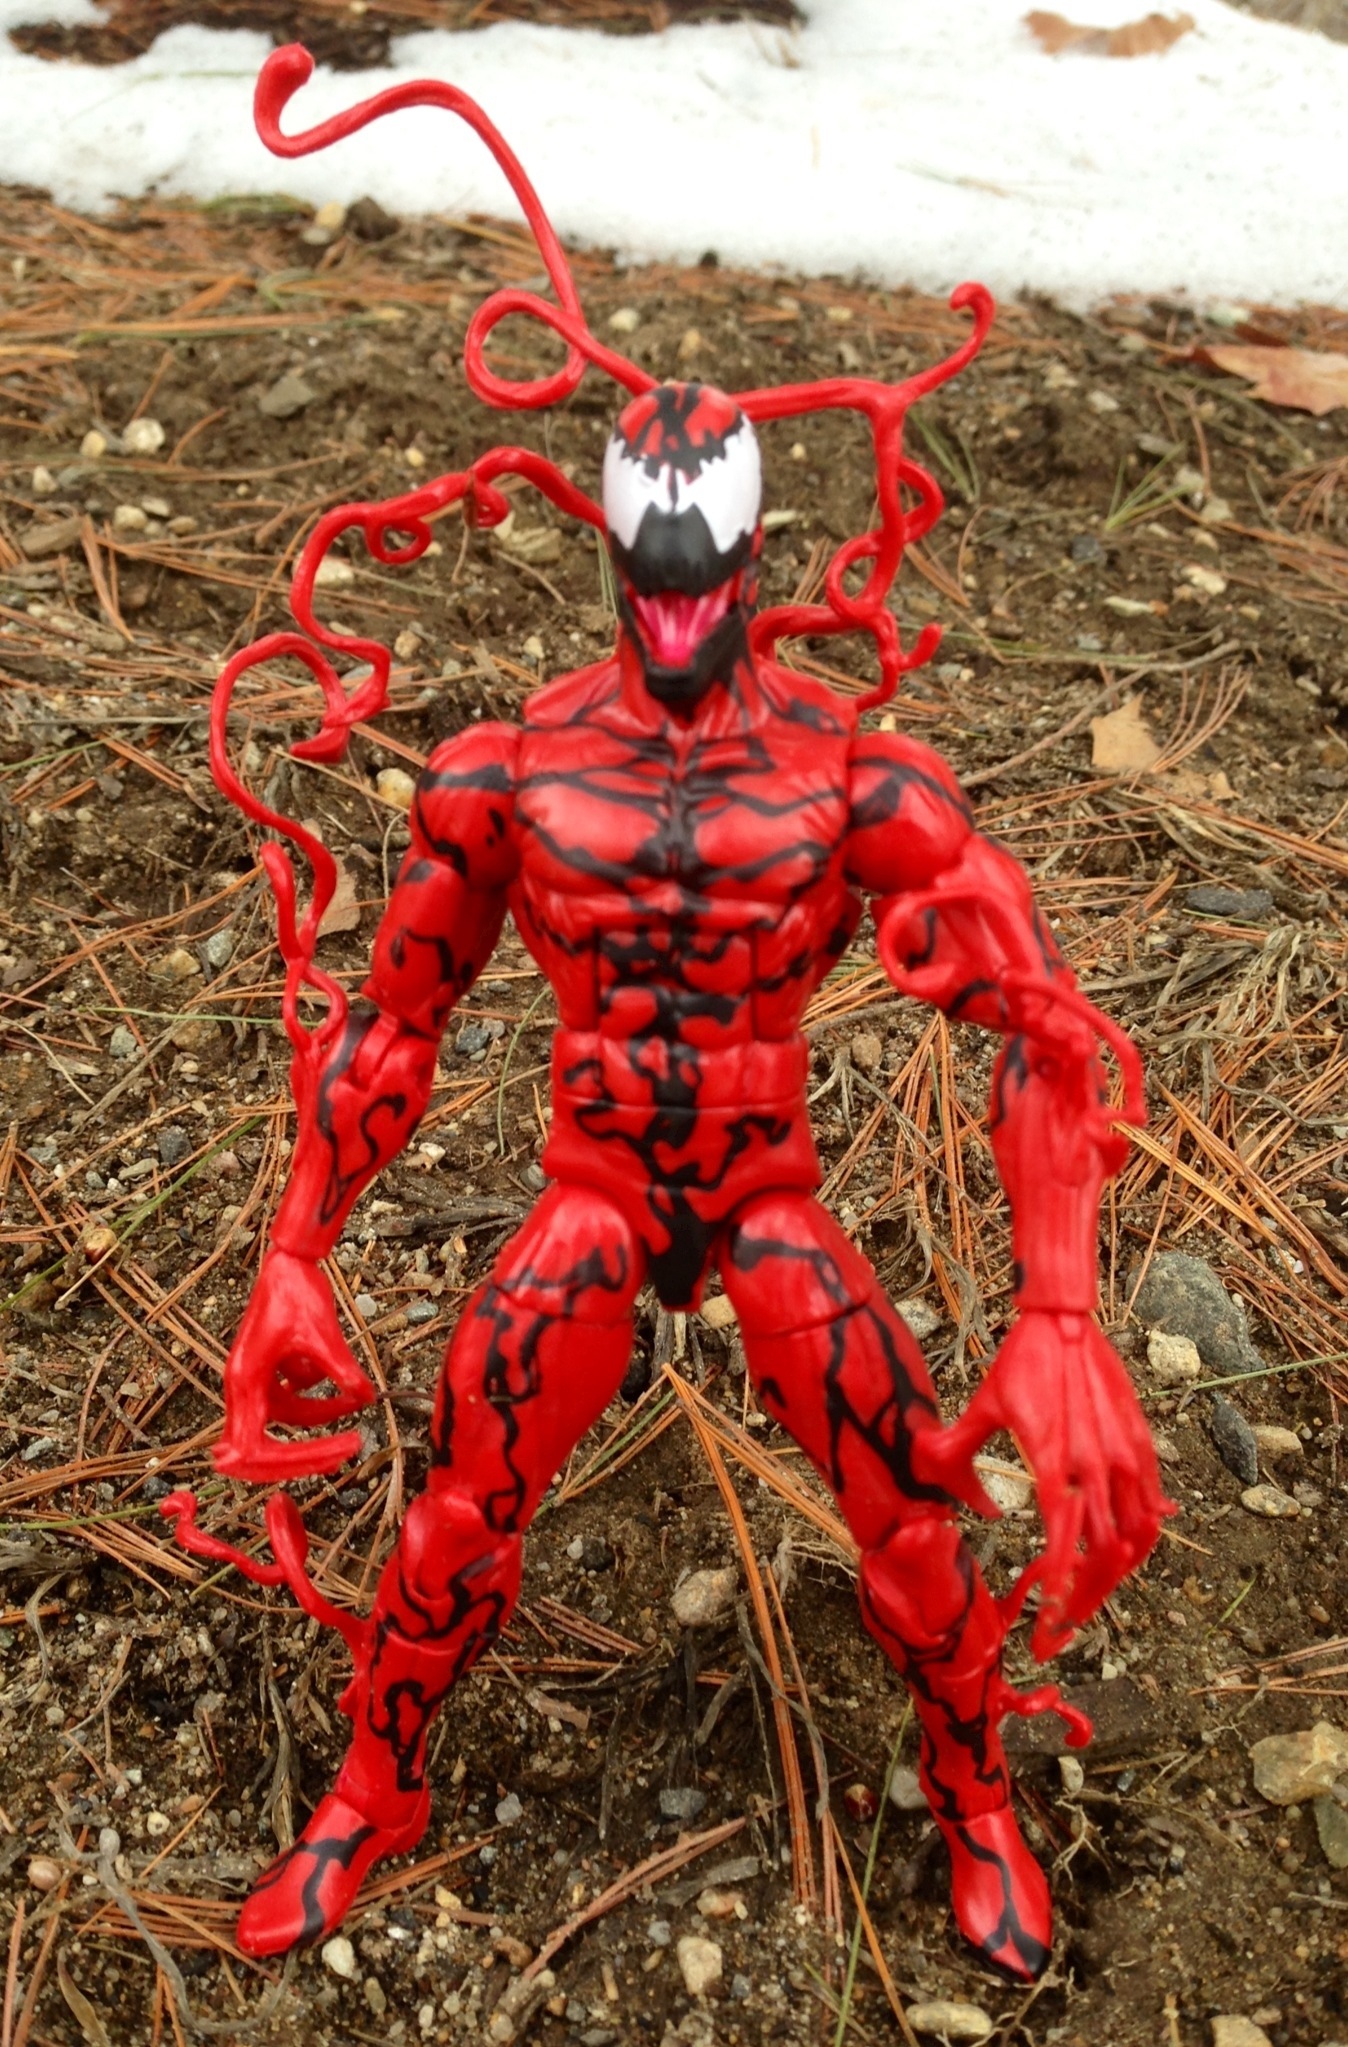 SpiderMan Marvel Legends Carnage Review & Photos (2014